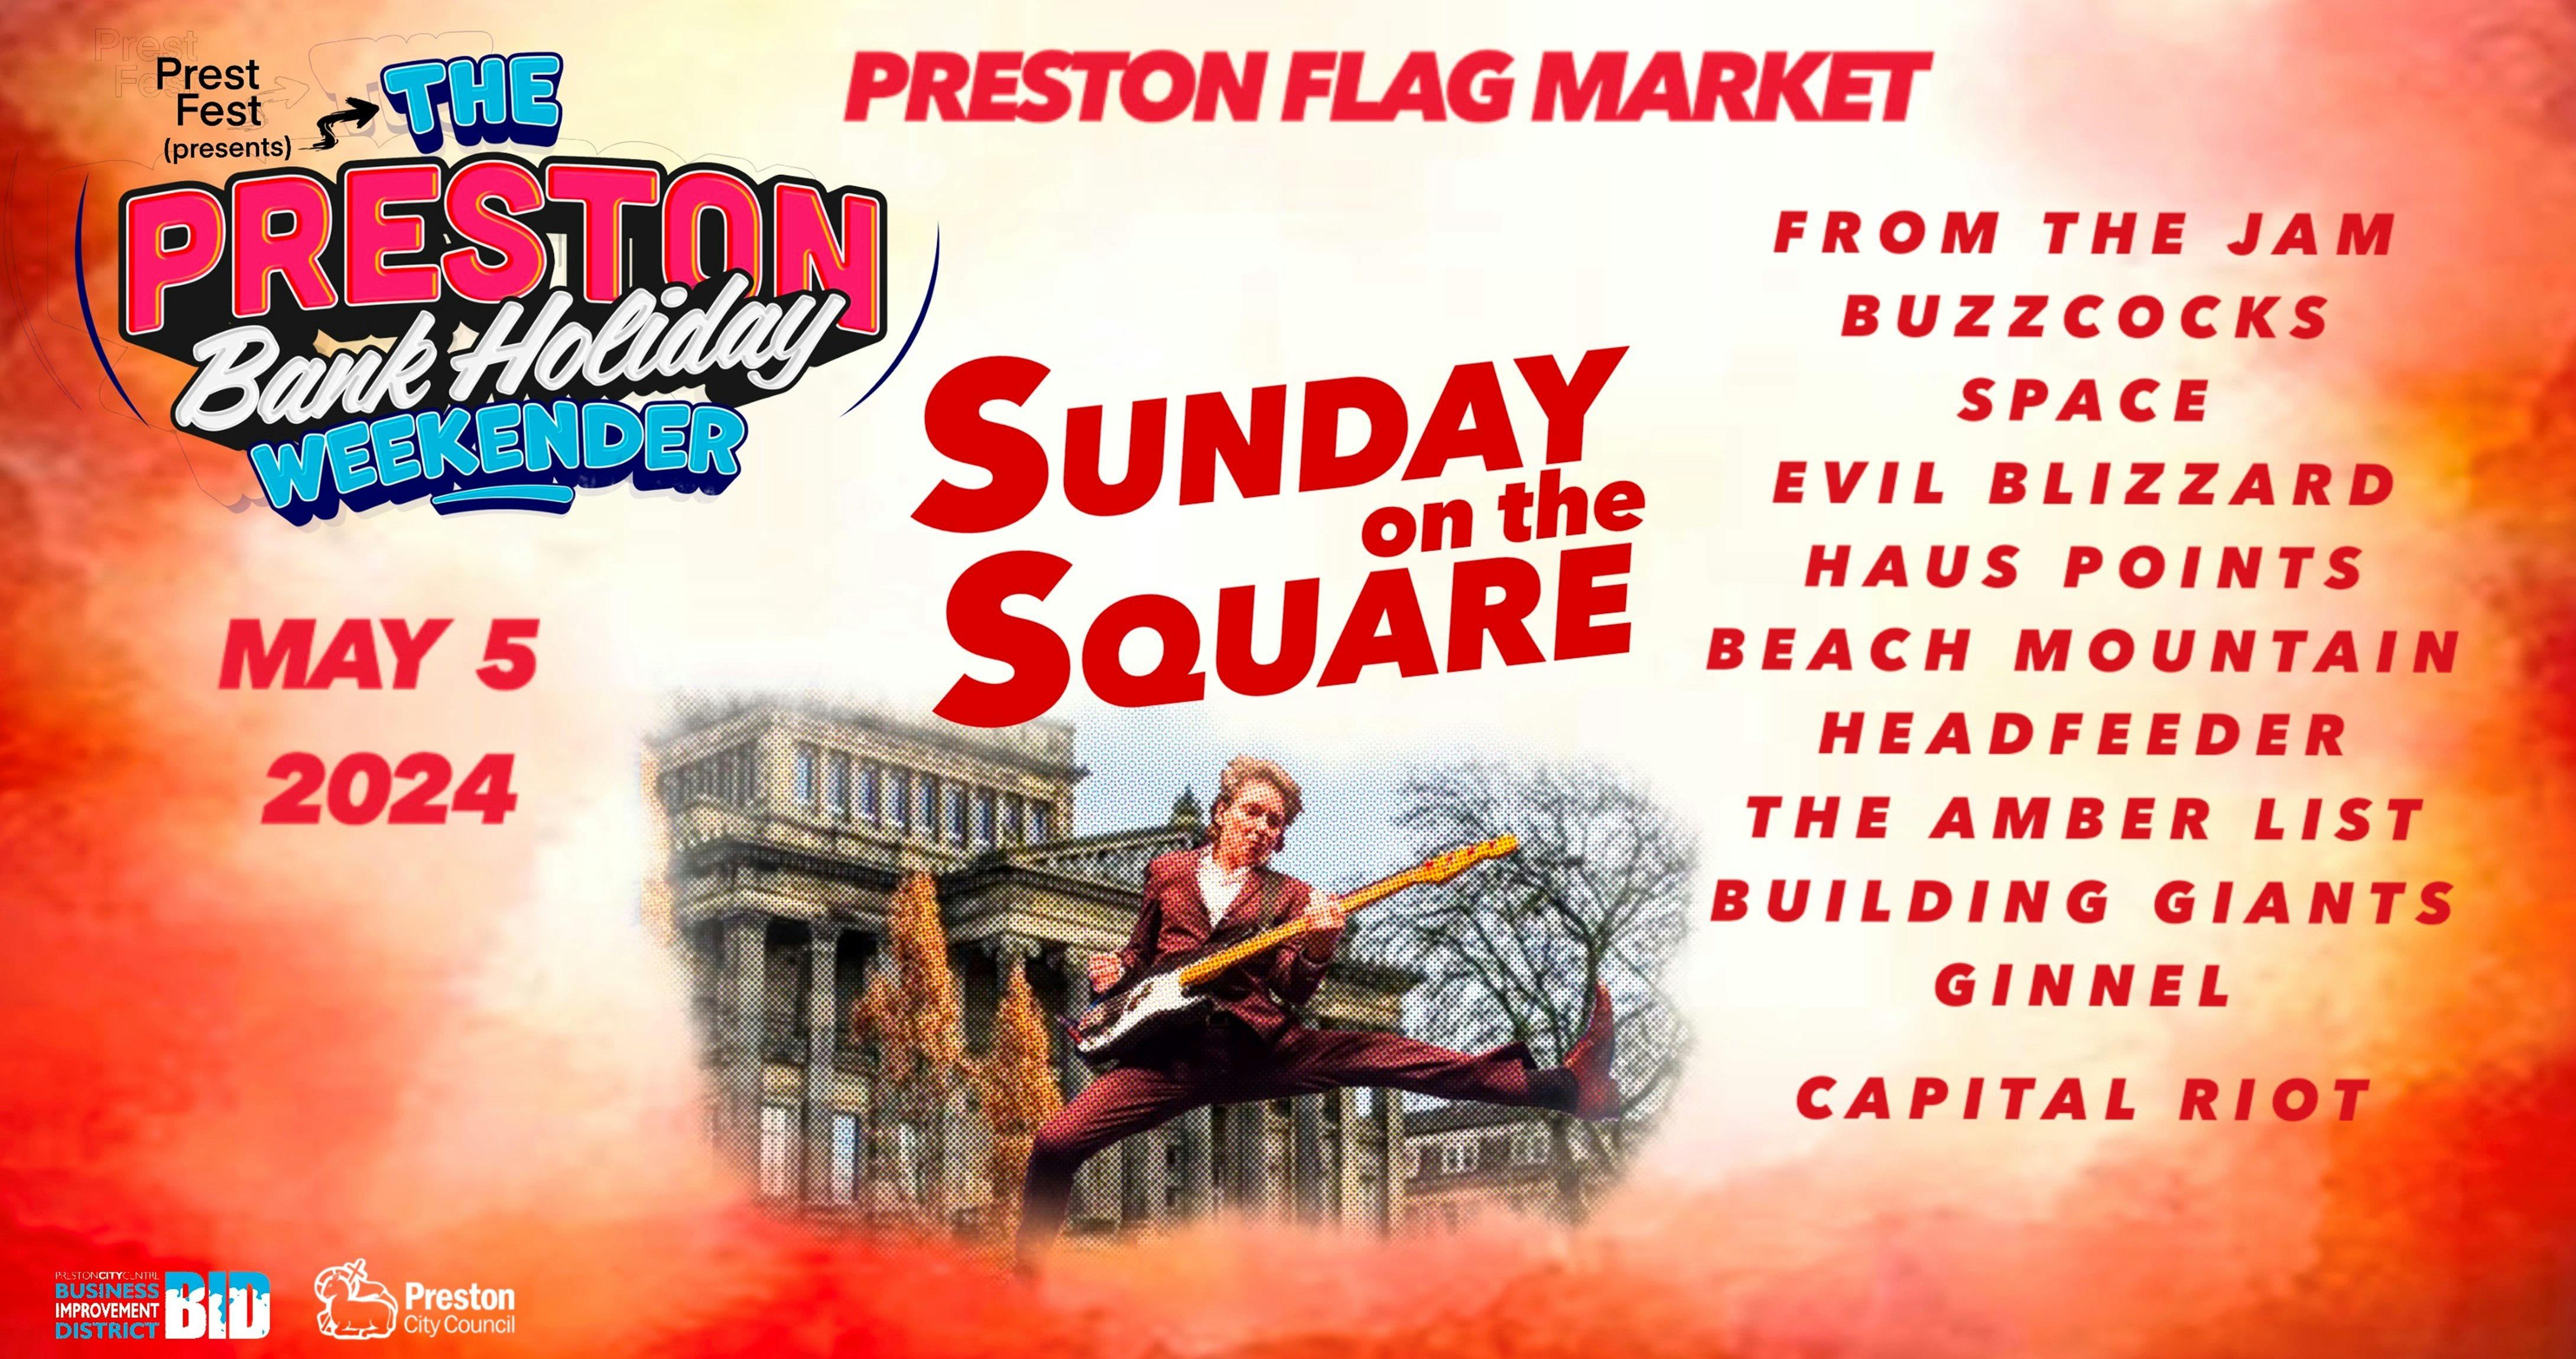 SUNDAY ON THE SQUARE